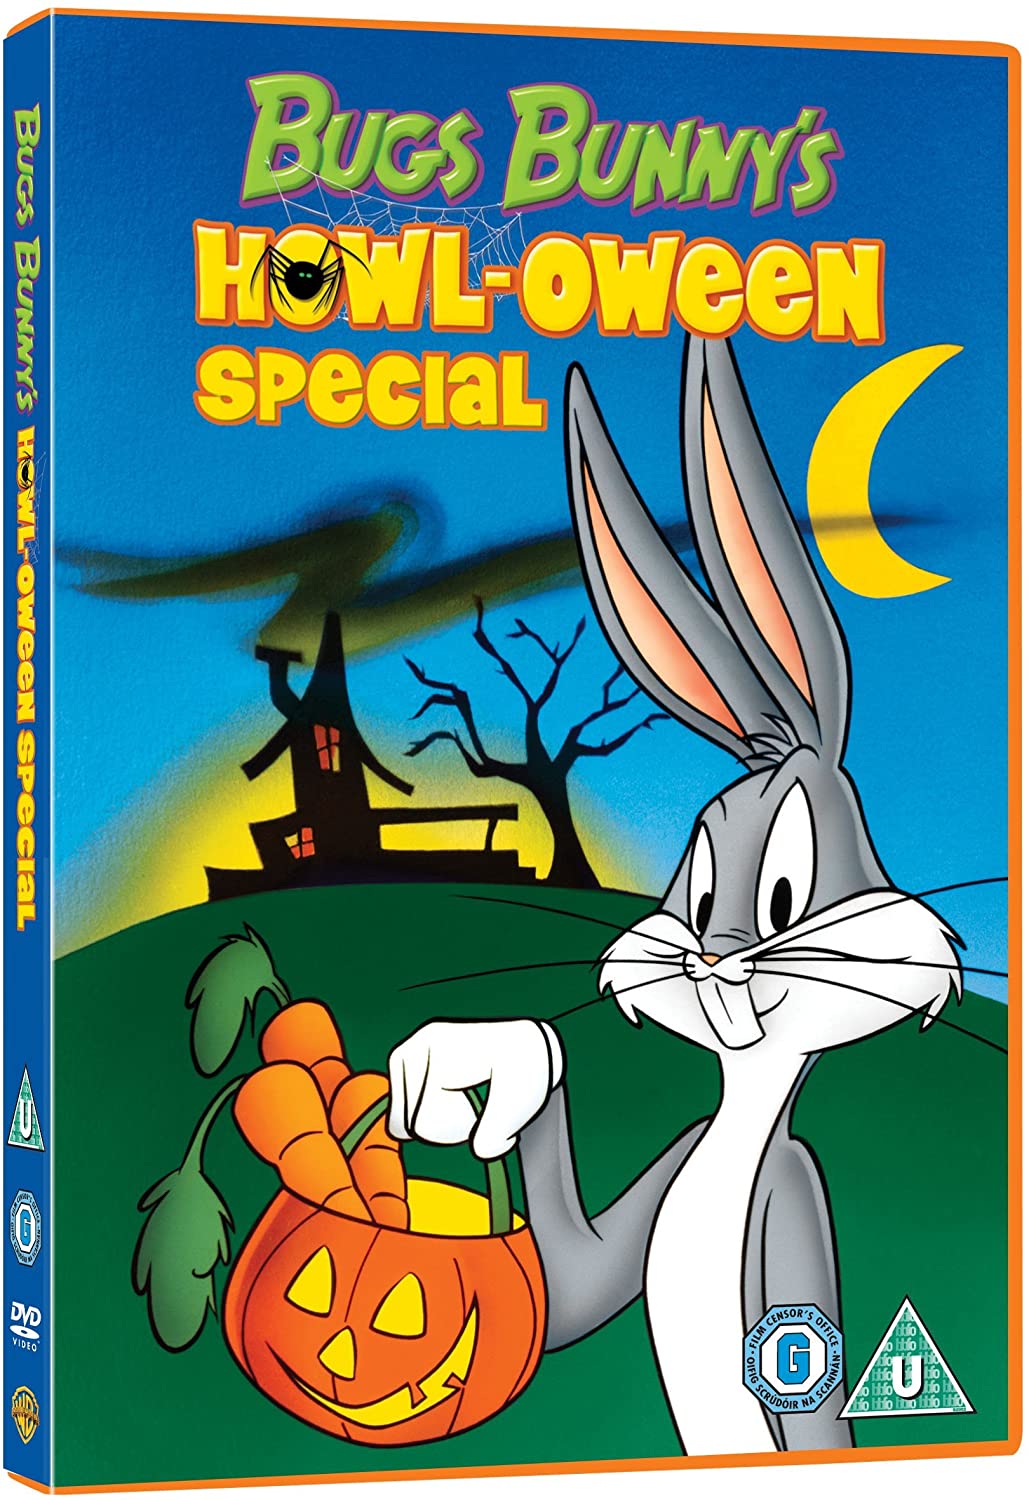 Bugs Bunny: Howl-oween Special [1978] [2010] - Family/Animation [DVD]